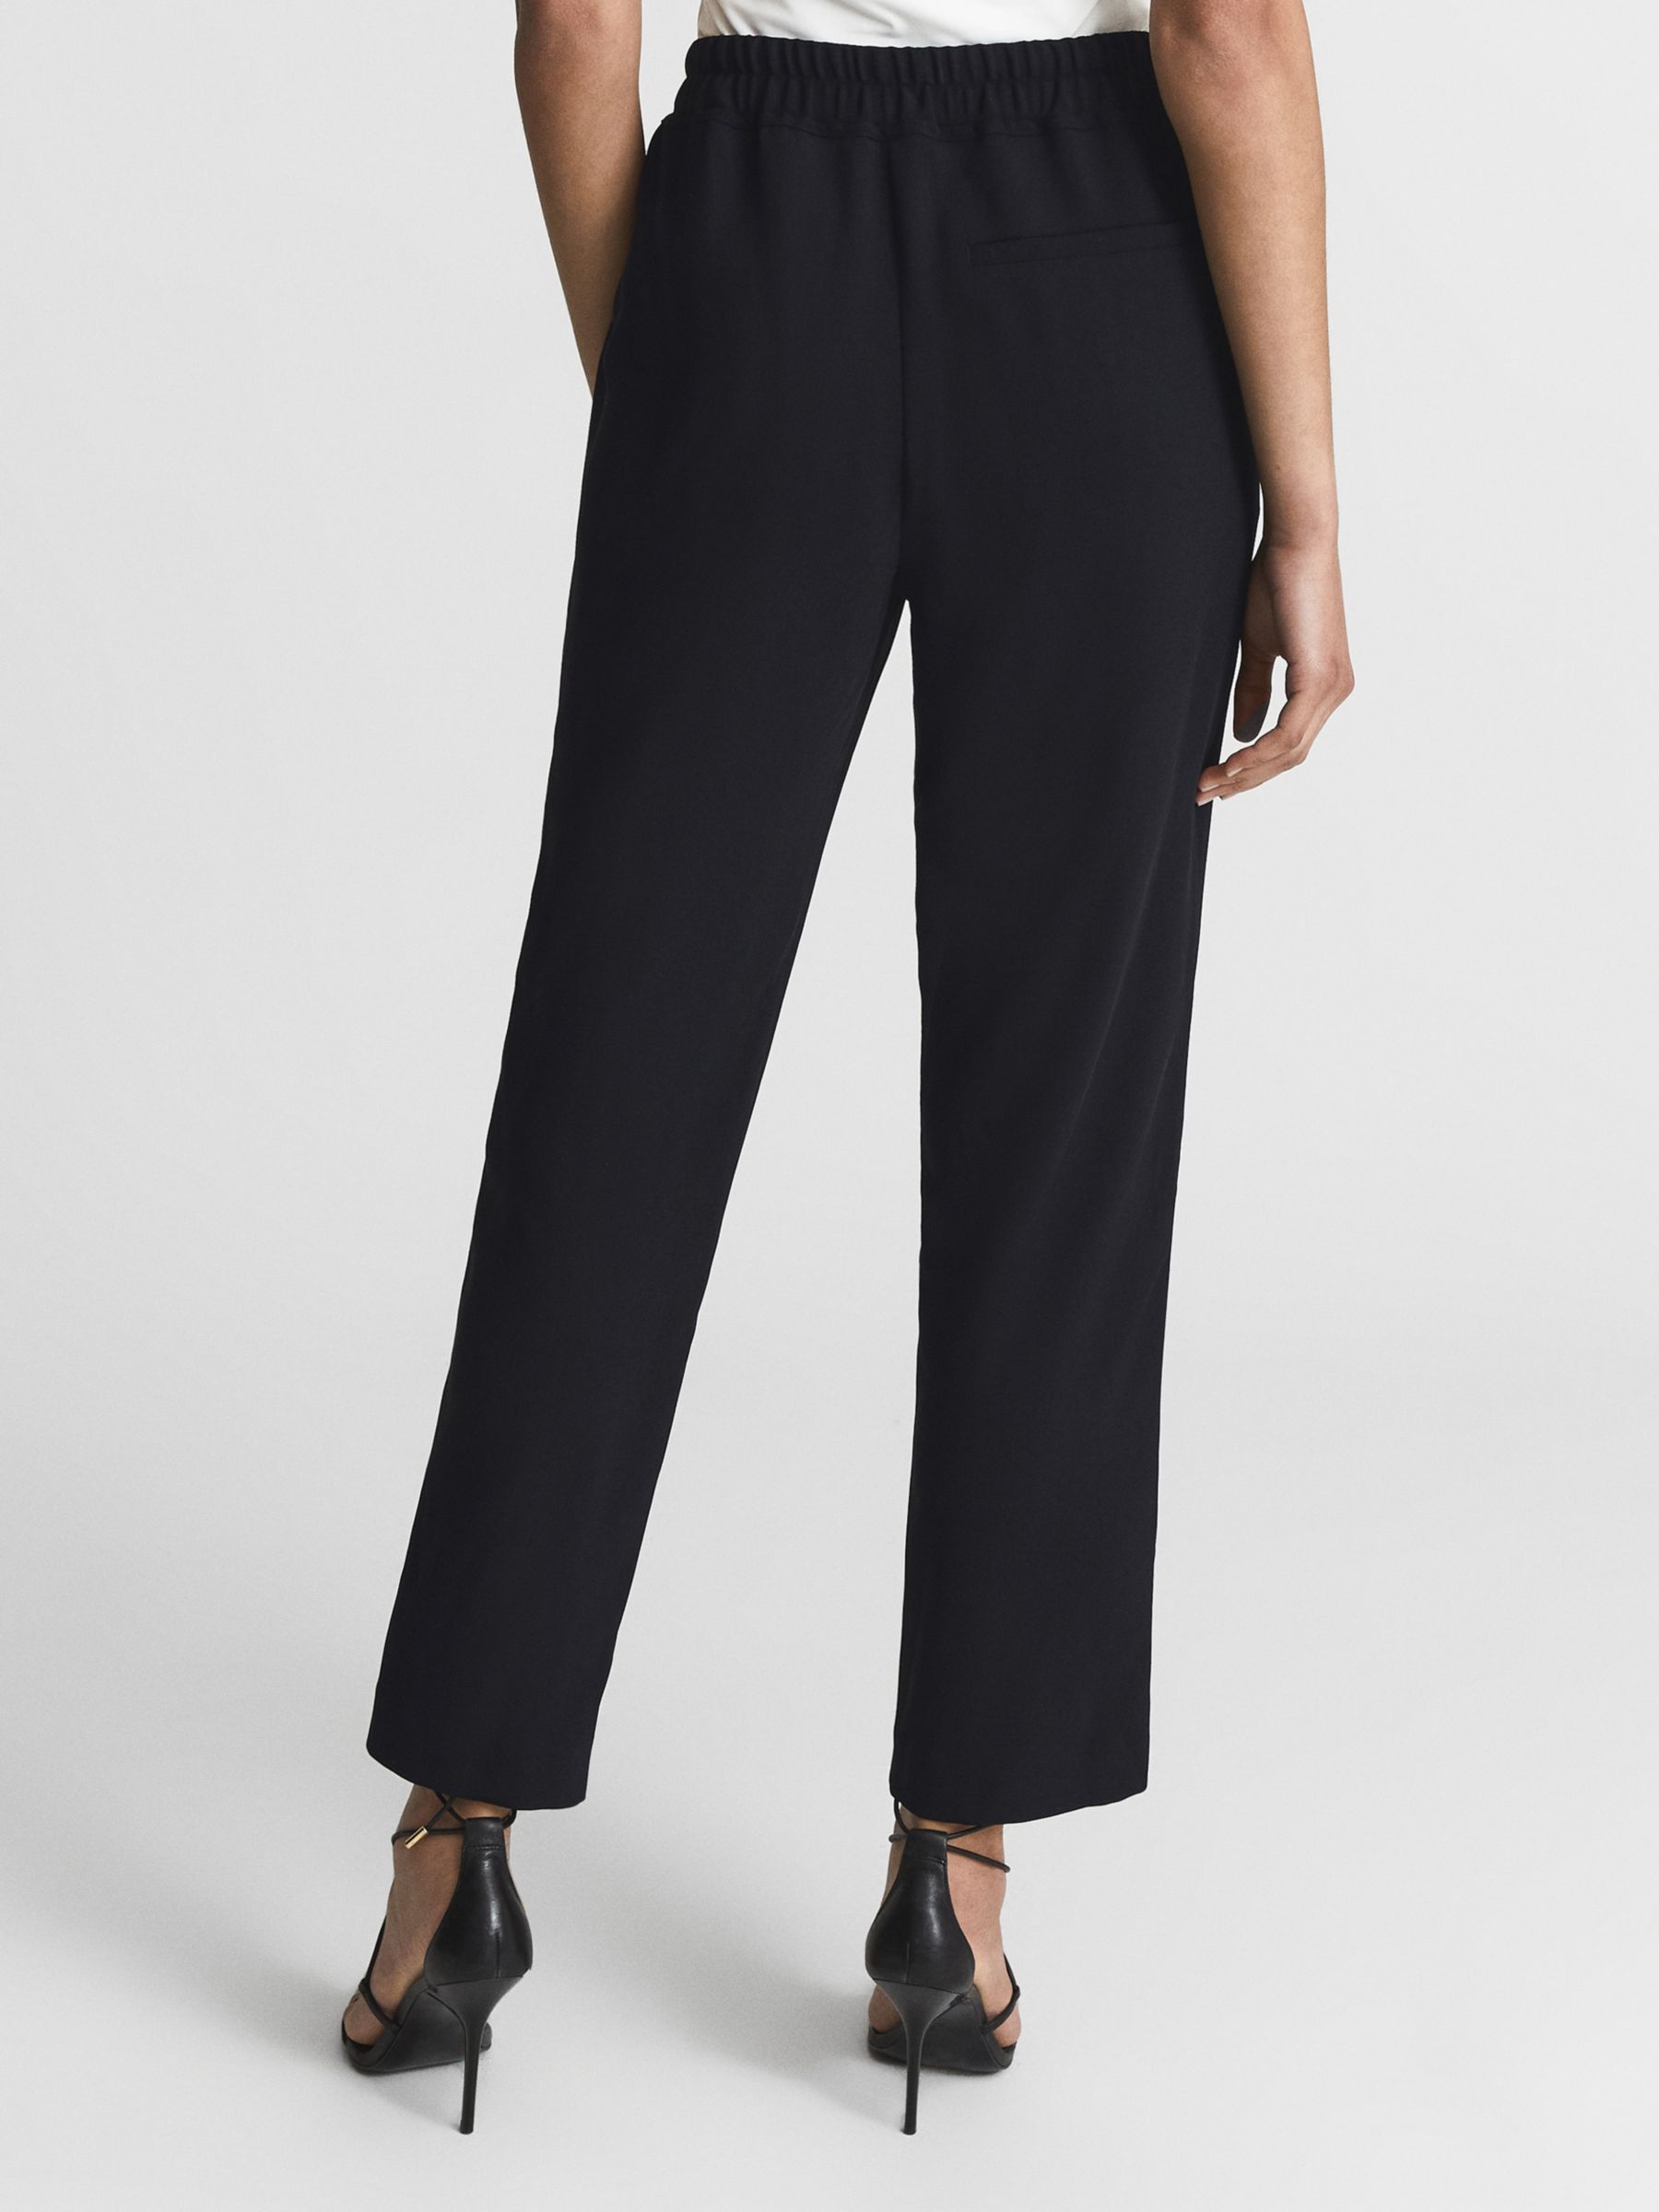 Reiss Petite Hailey Cropped Trousers, Black, 6